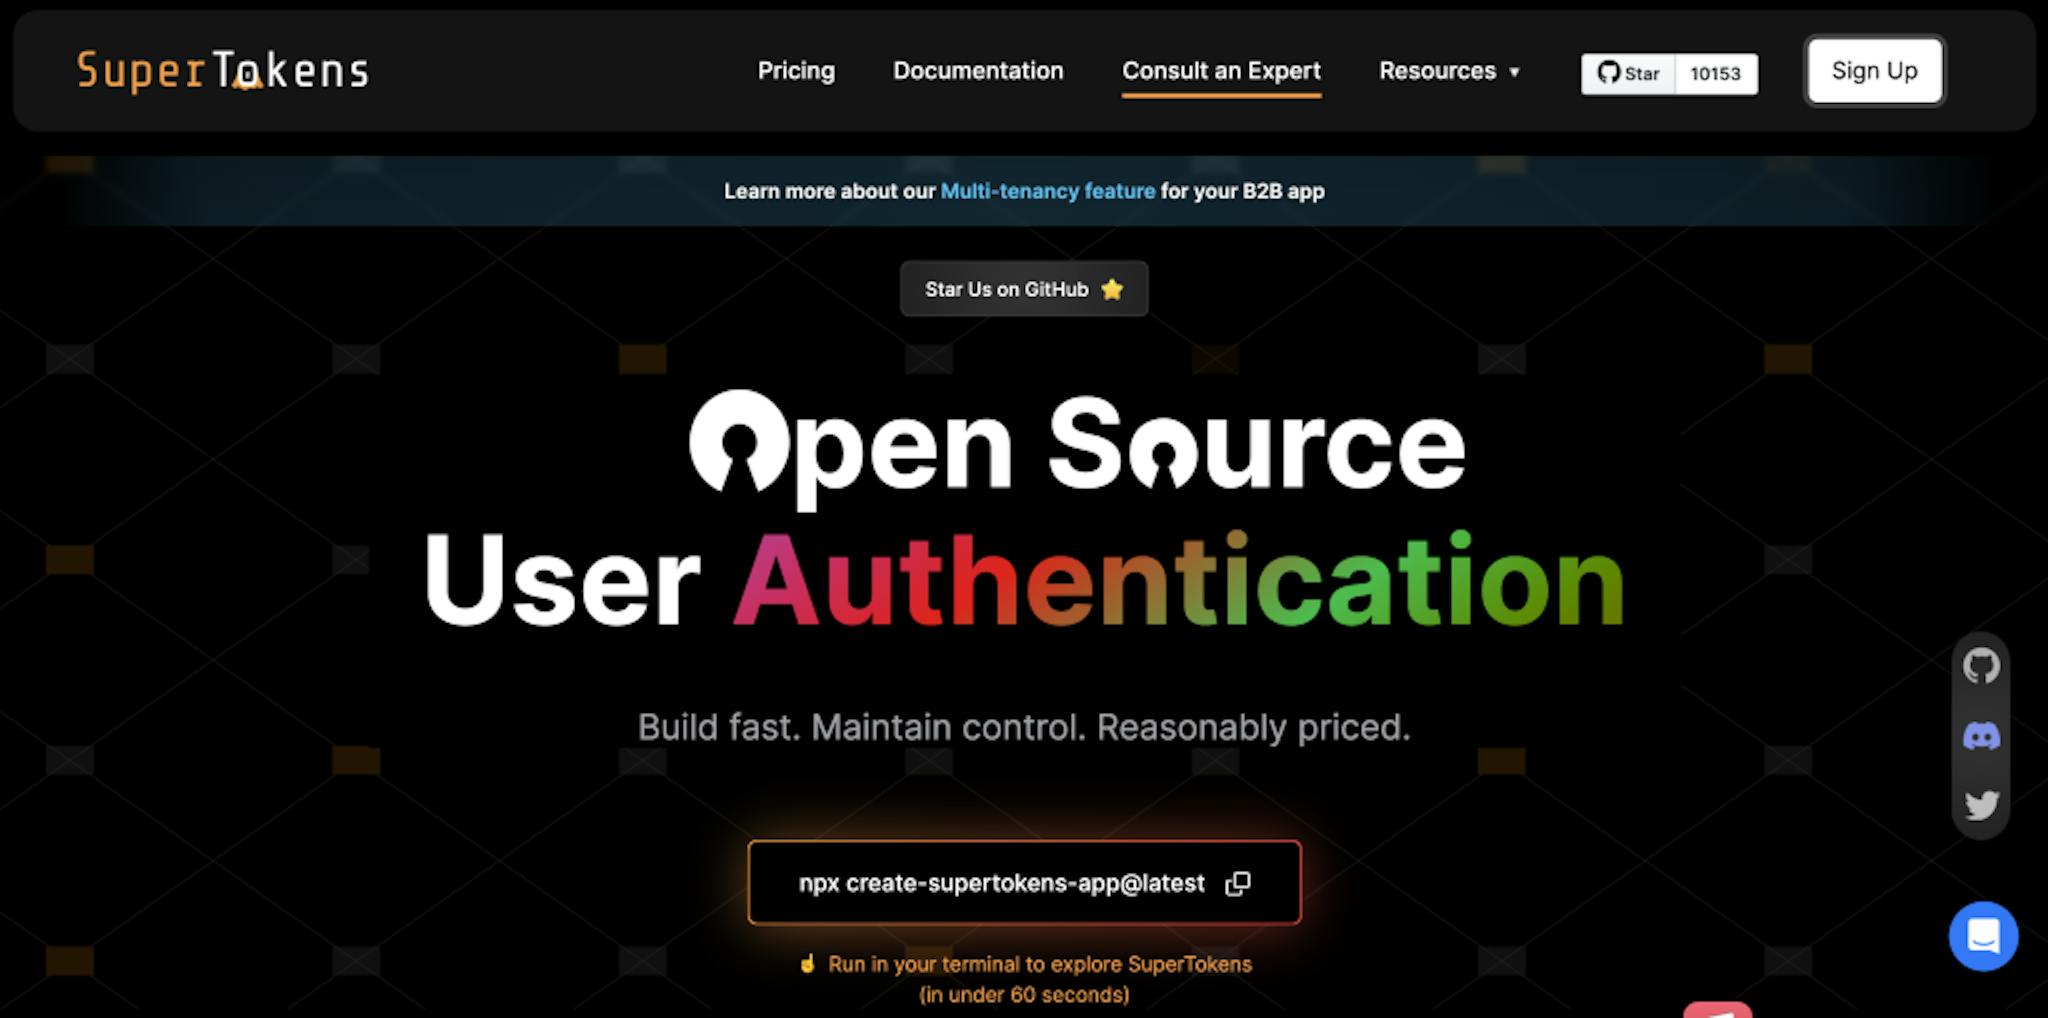 SuperTokens-Open Source-User-Authentication-review